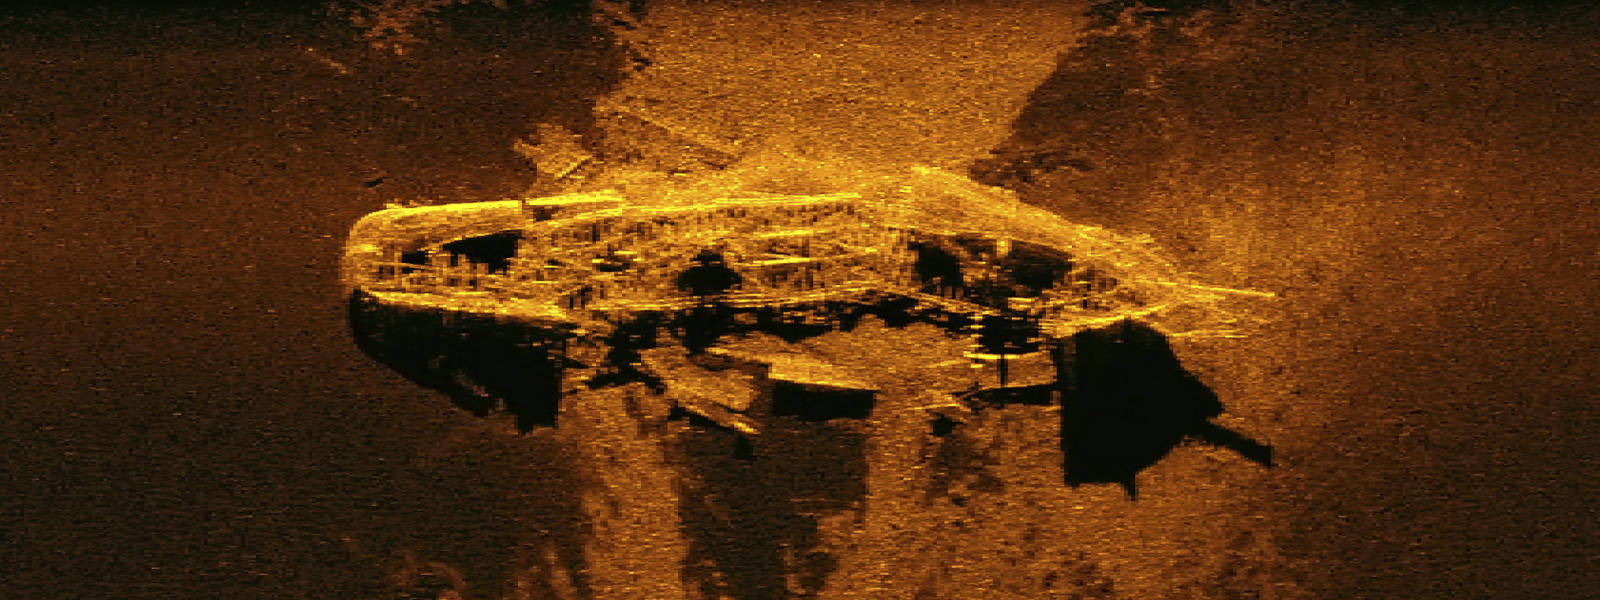 MH370 search uncovers shipwrecks from 19th Century